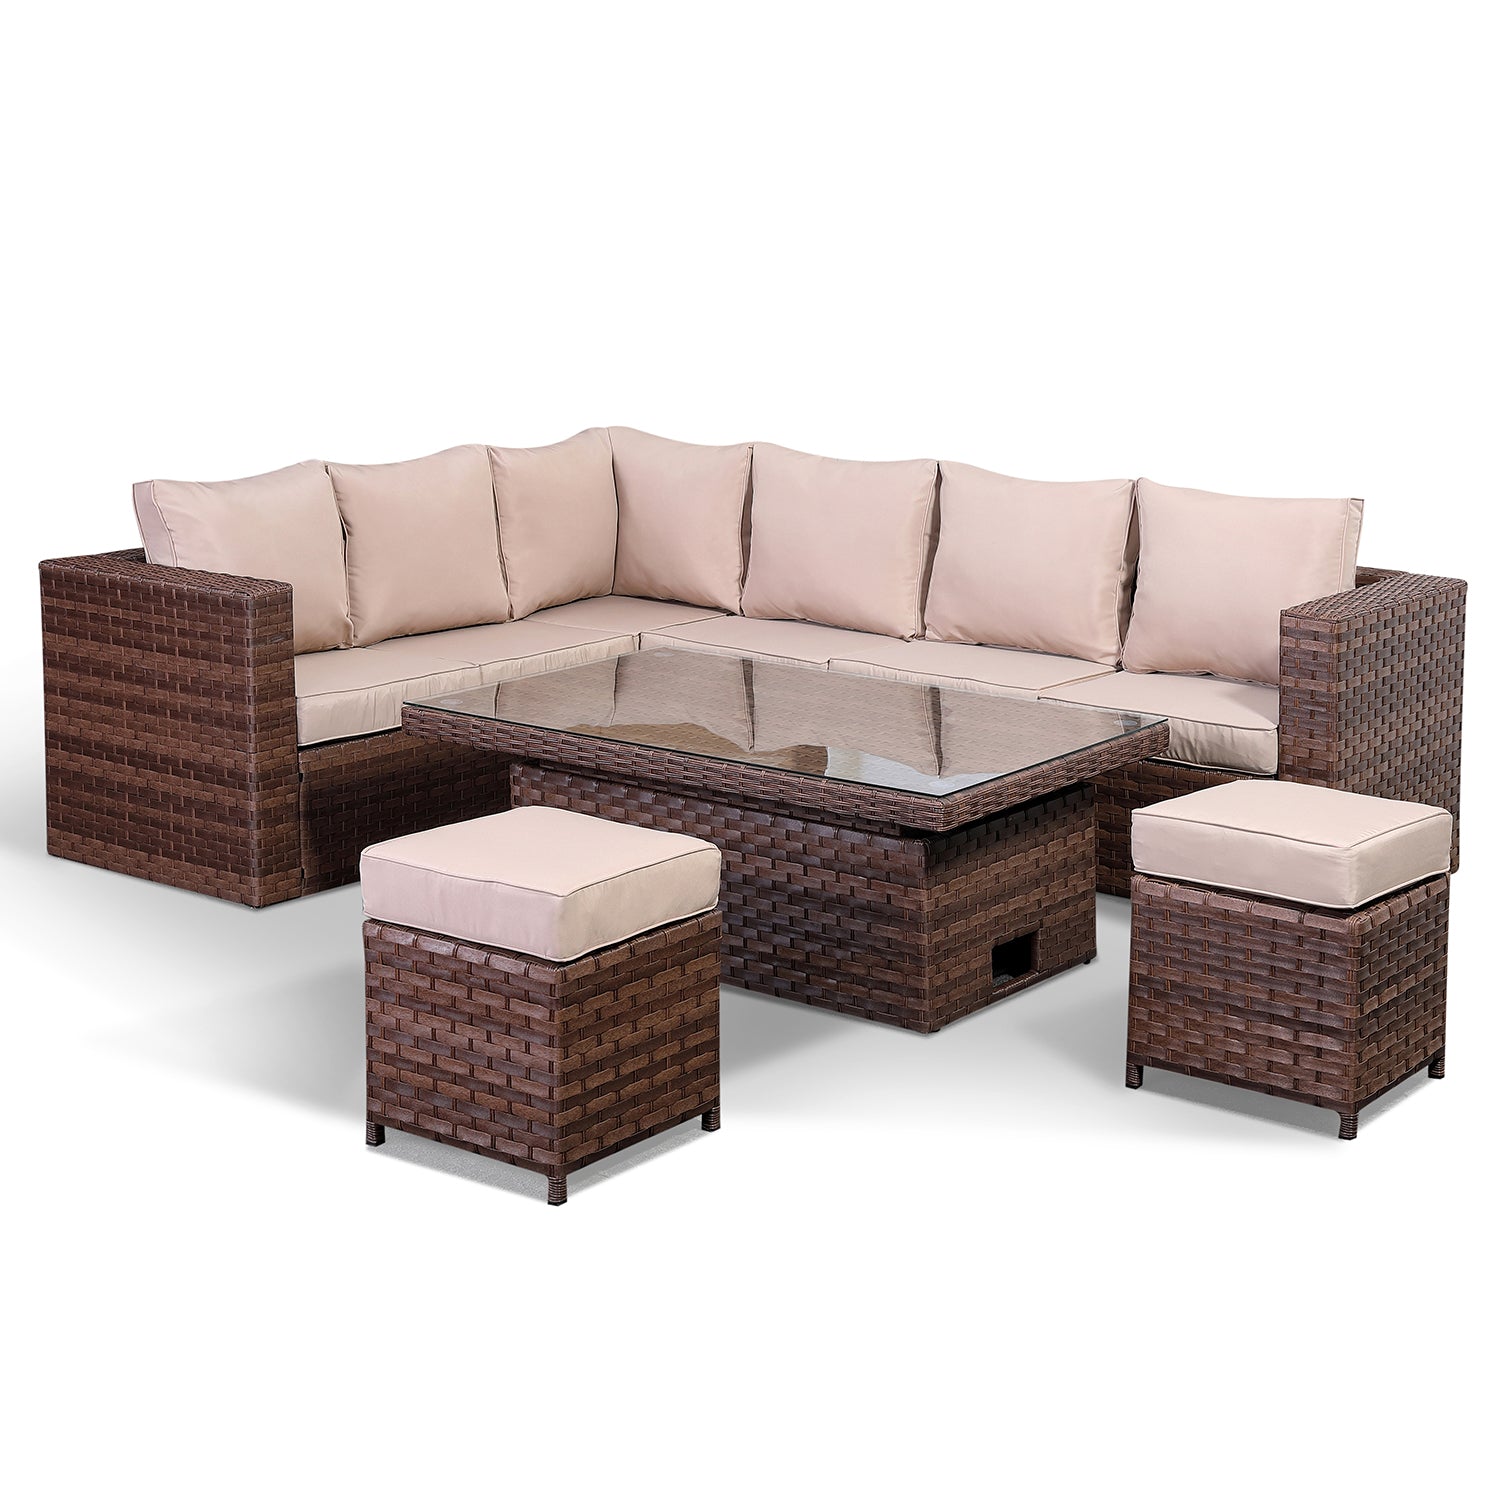 Pansy Range LHF Large Dining Corner Set with Rising Table In Large Brown Weave